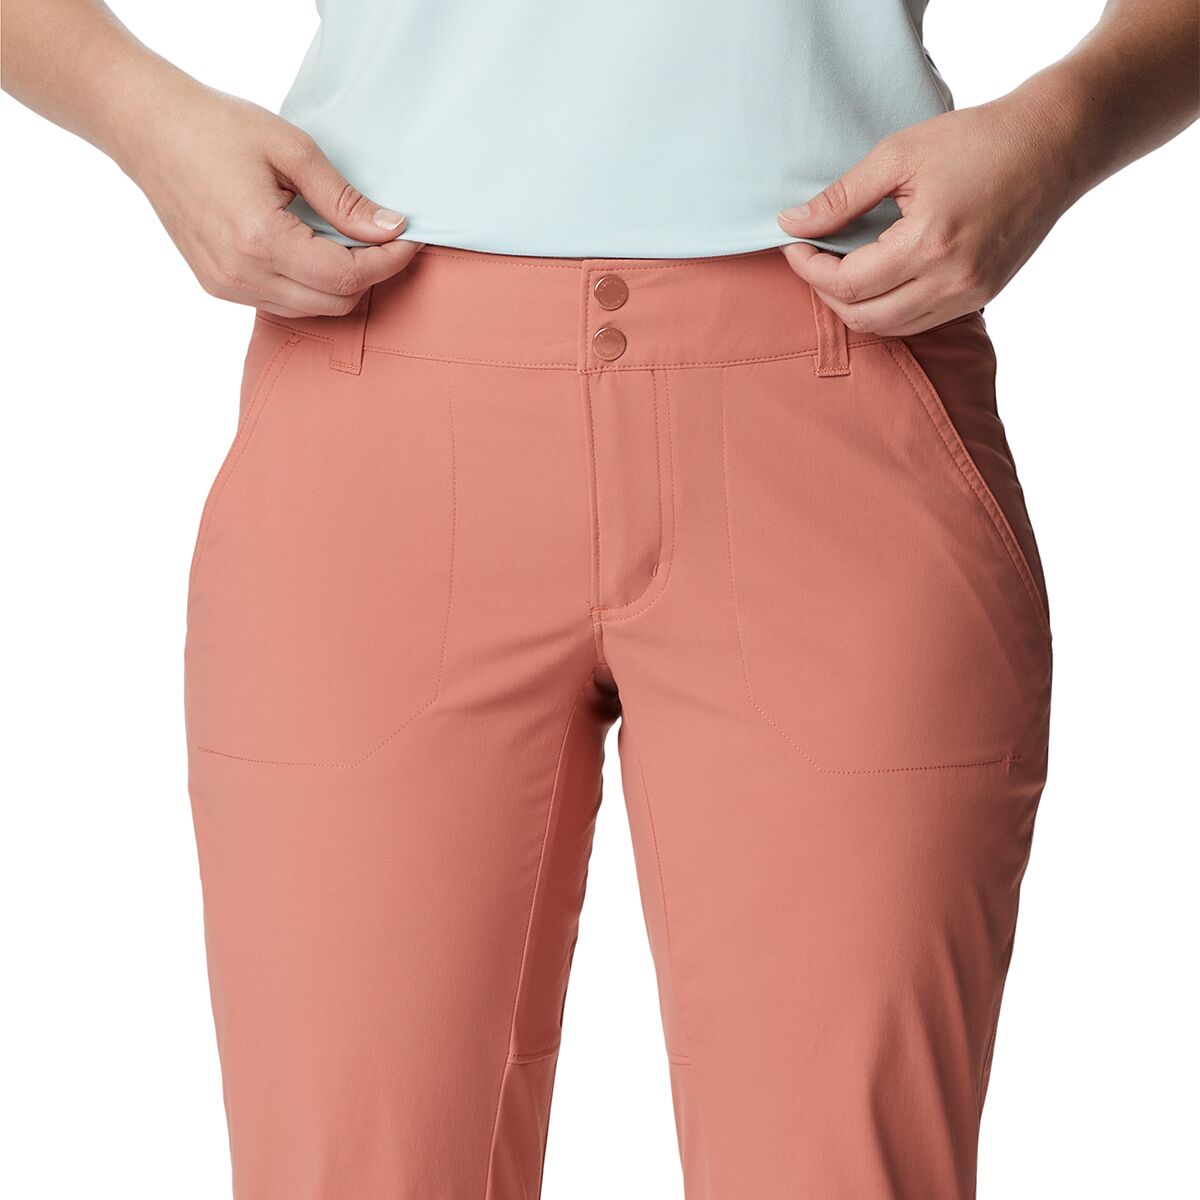 Columbia Saturday Trail Pant - Women's - Clothing